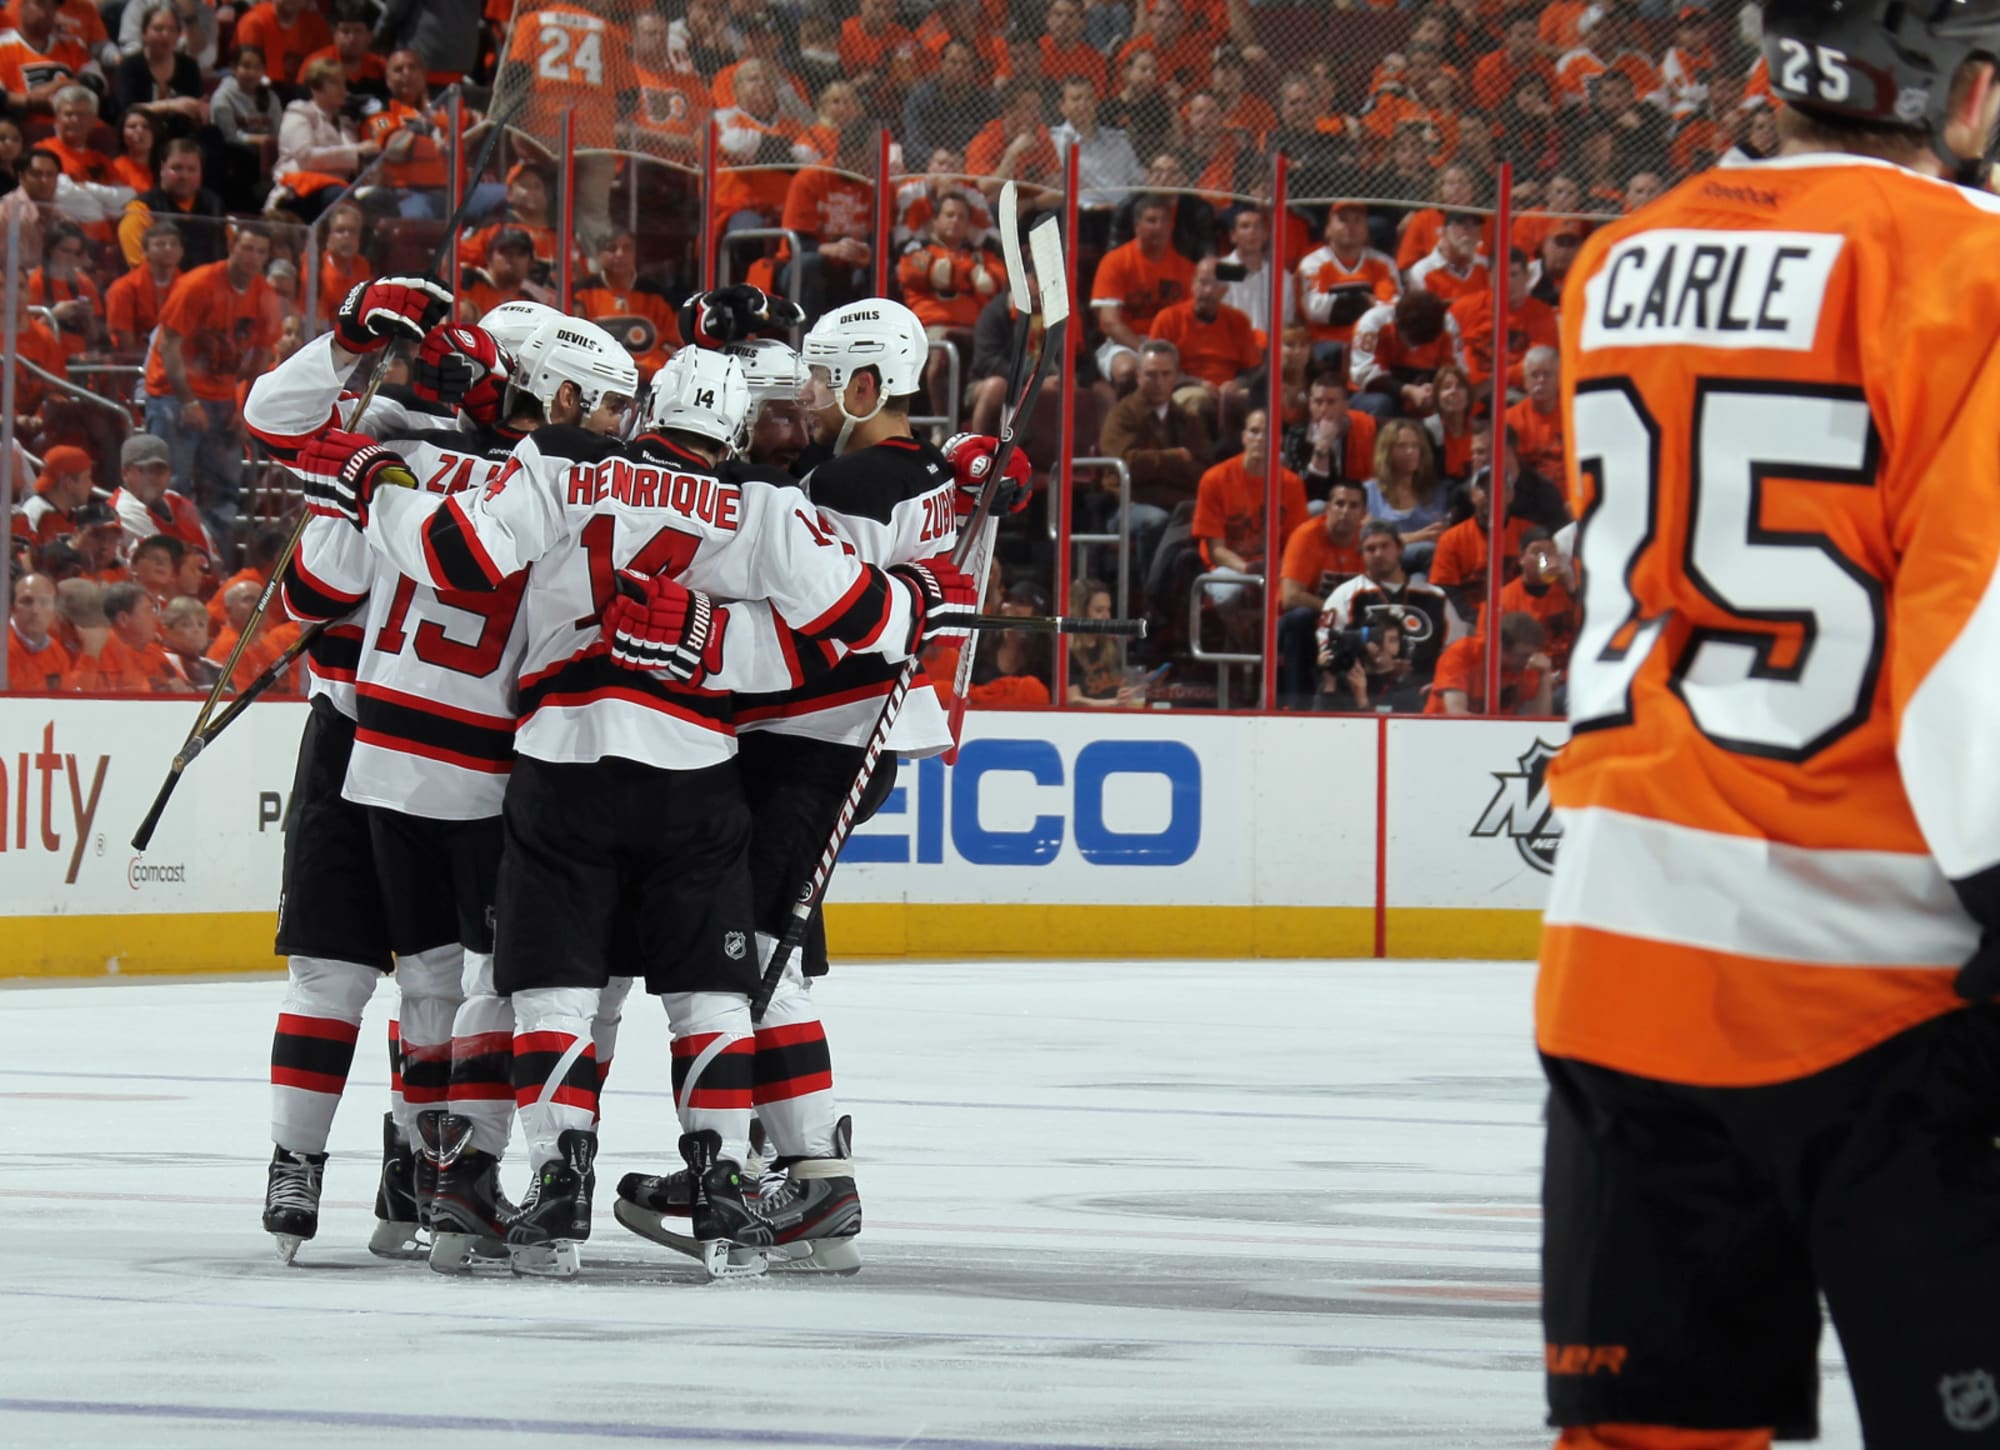 Devils-Flyers playoff history